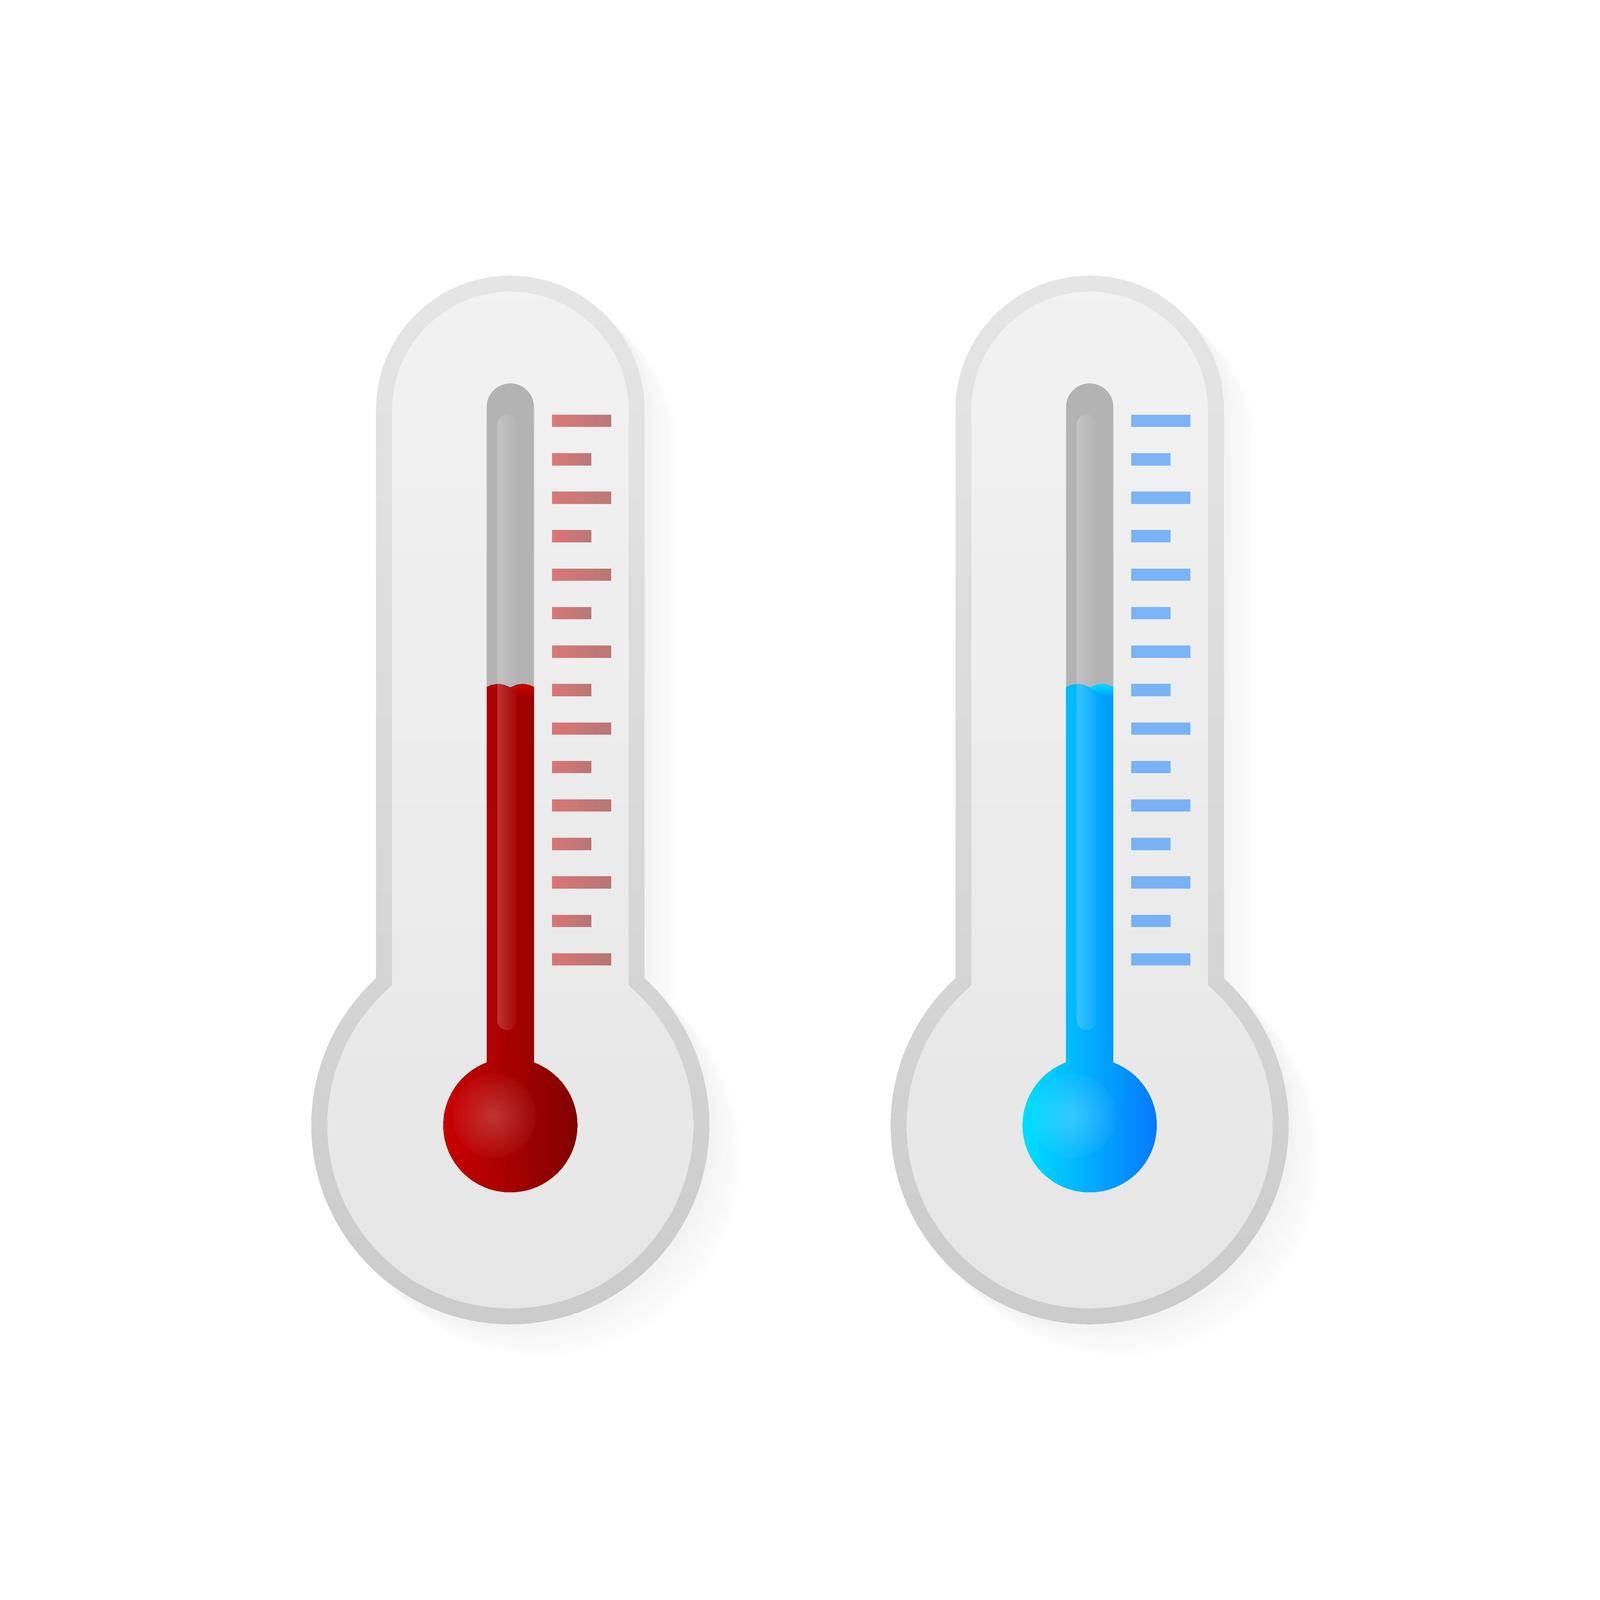 Linear measuring temperature for medical design. Vector logo by Vector-Up